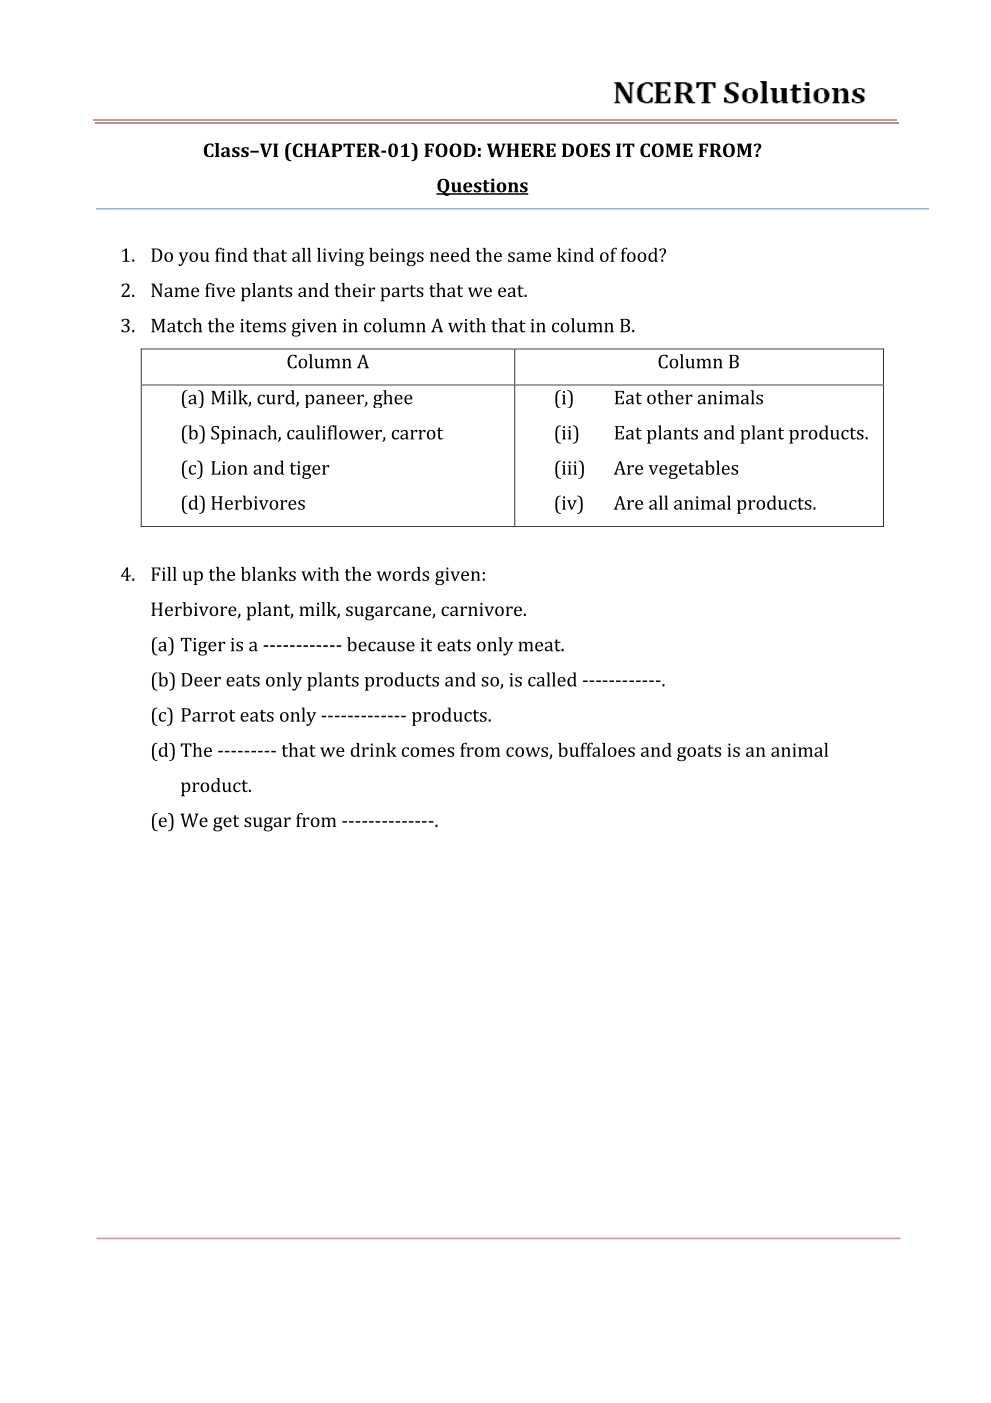 NCERT Solutions For Class 6 Science Chapter 1